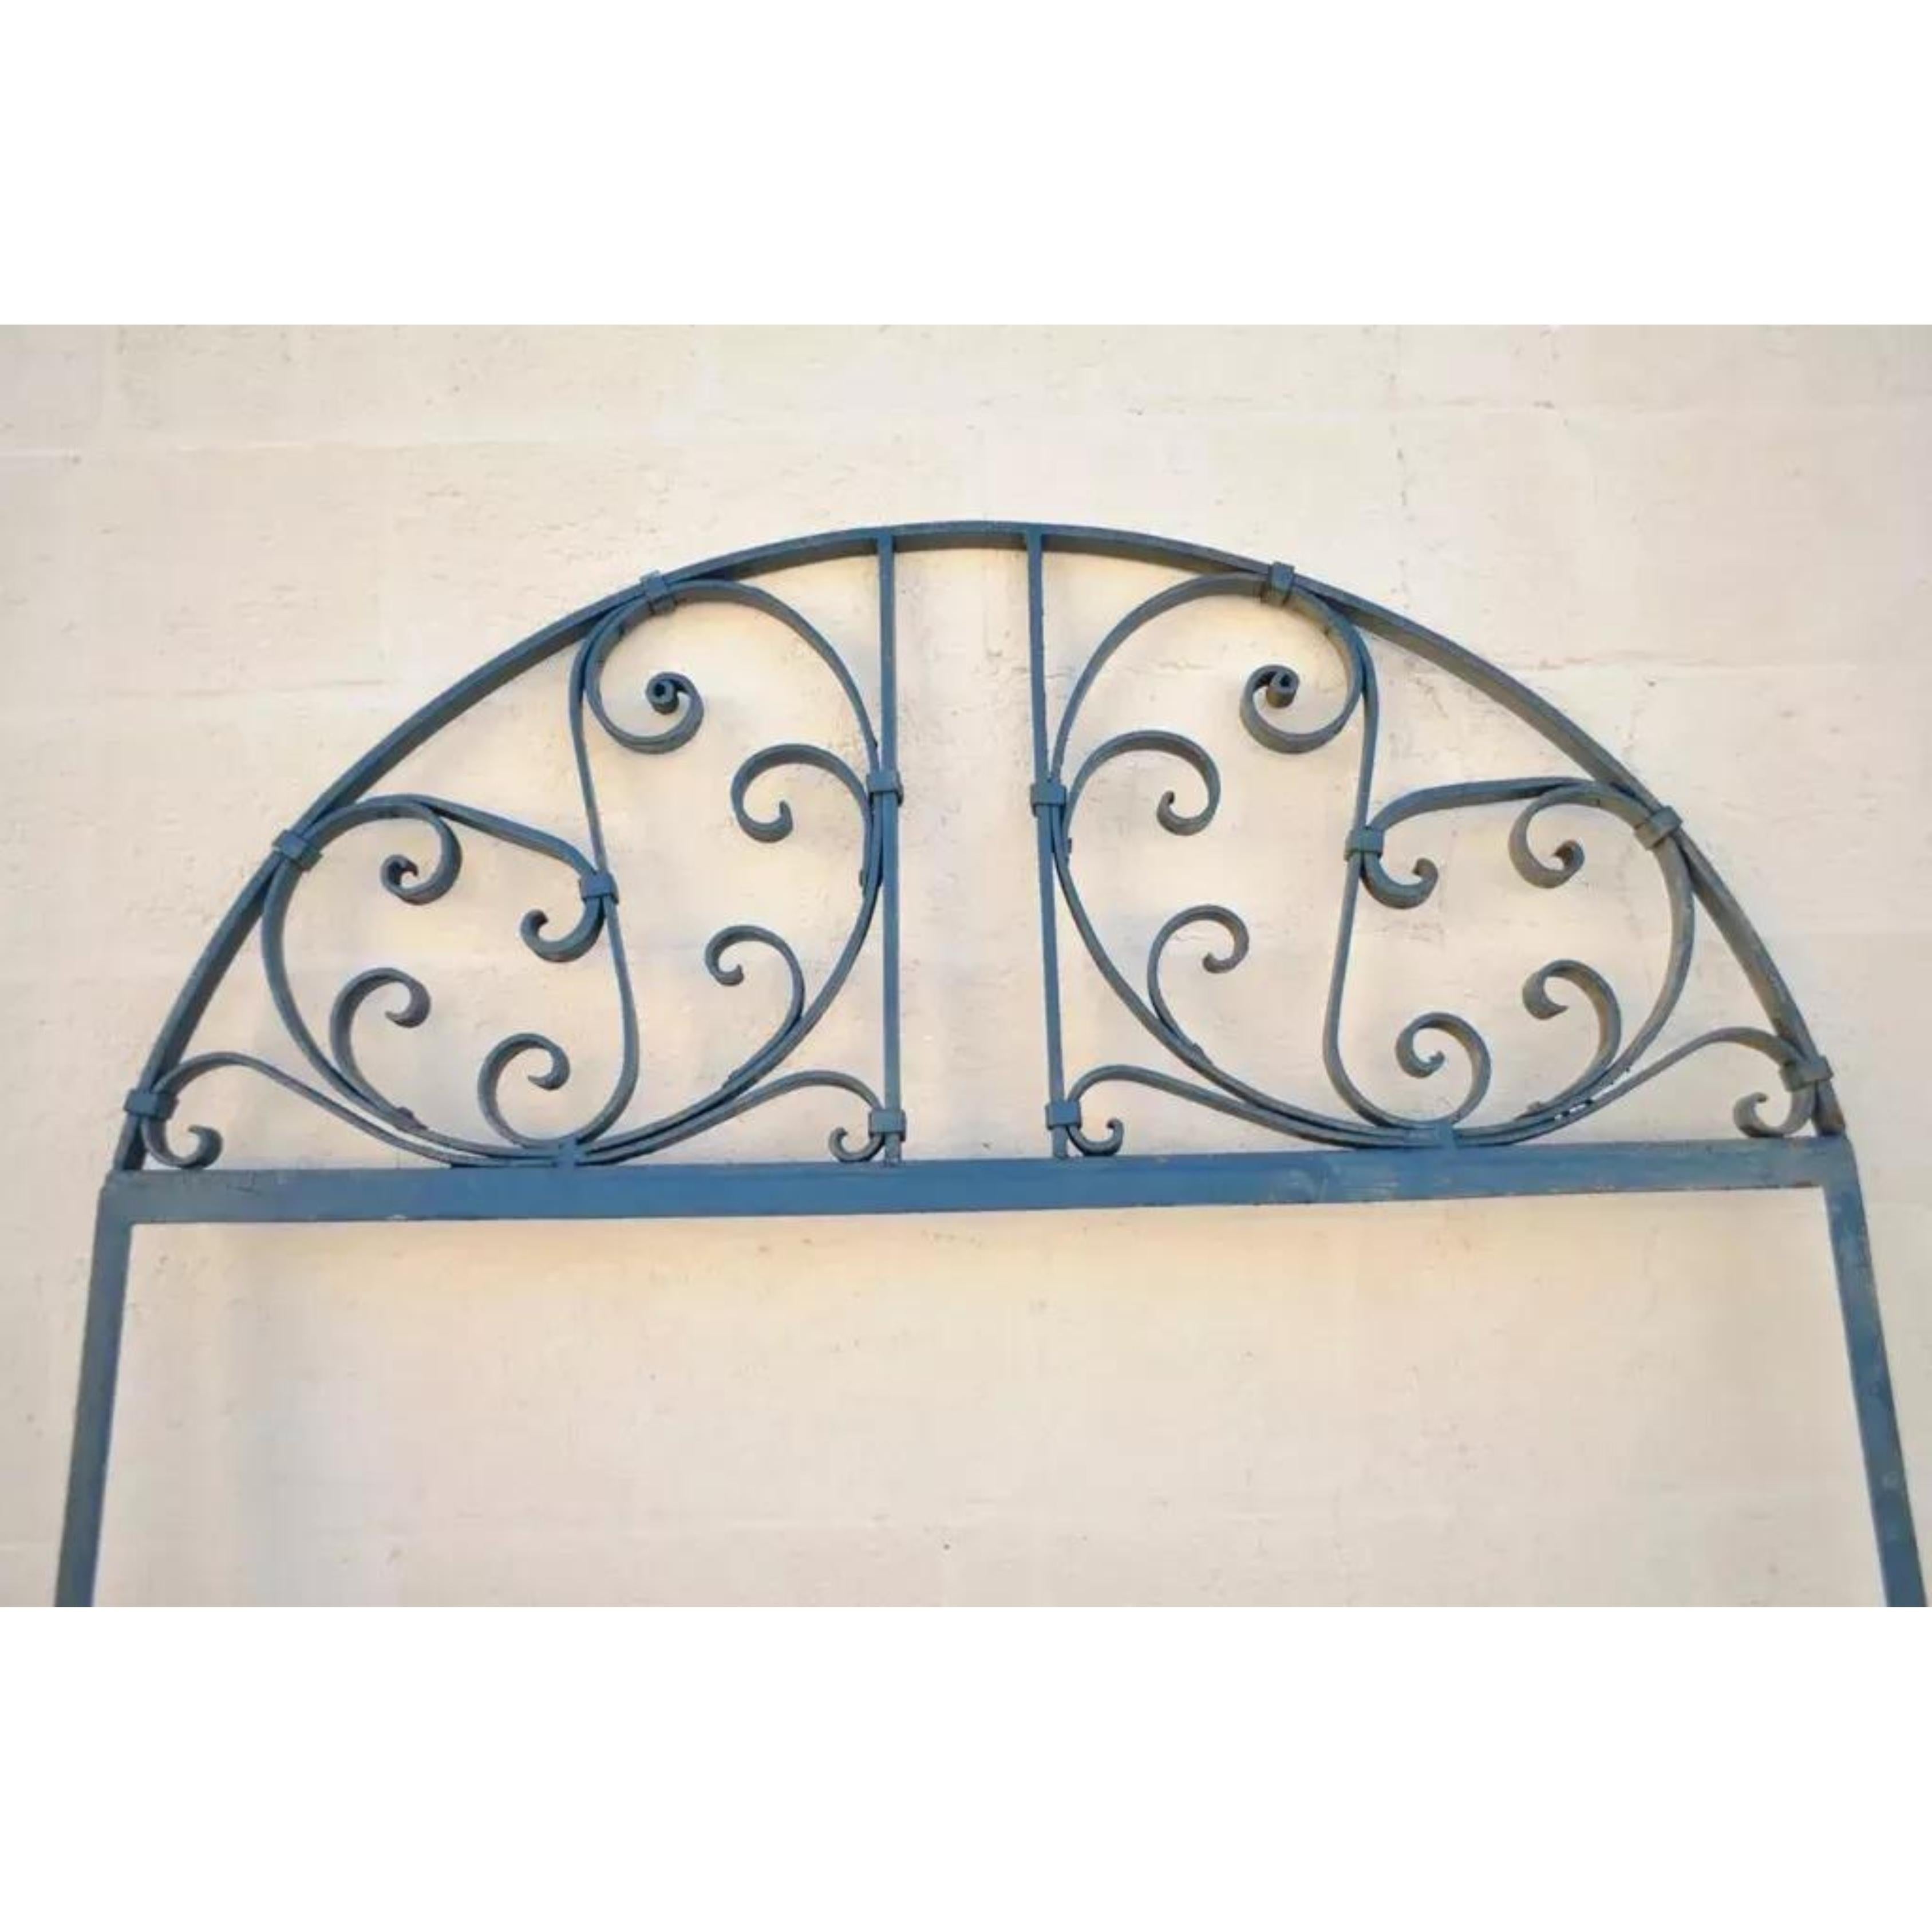 Vintage Wrought Iron Arch Top 7.5' Full Length Floor Mirror Frame Garden Element. Item features a handmade frame with ornate scrolling details. Great to use as a tall full length mirror. Listing does not include glass or hardware. Buyer responsible